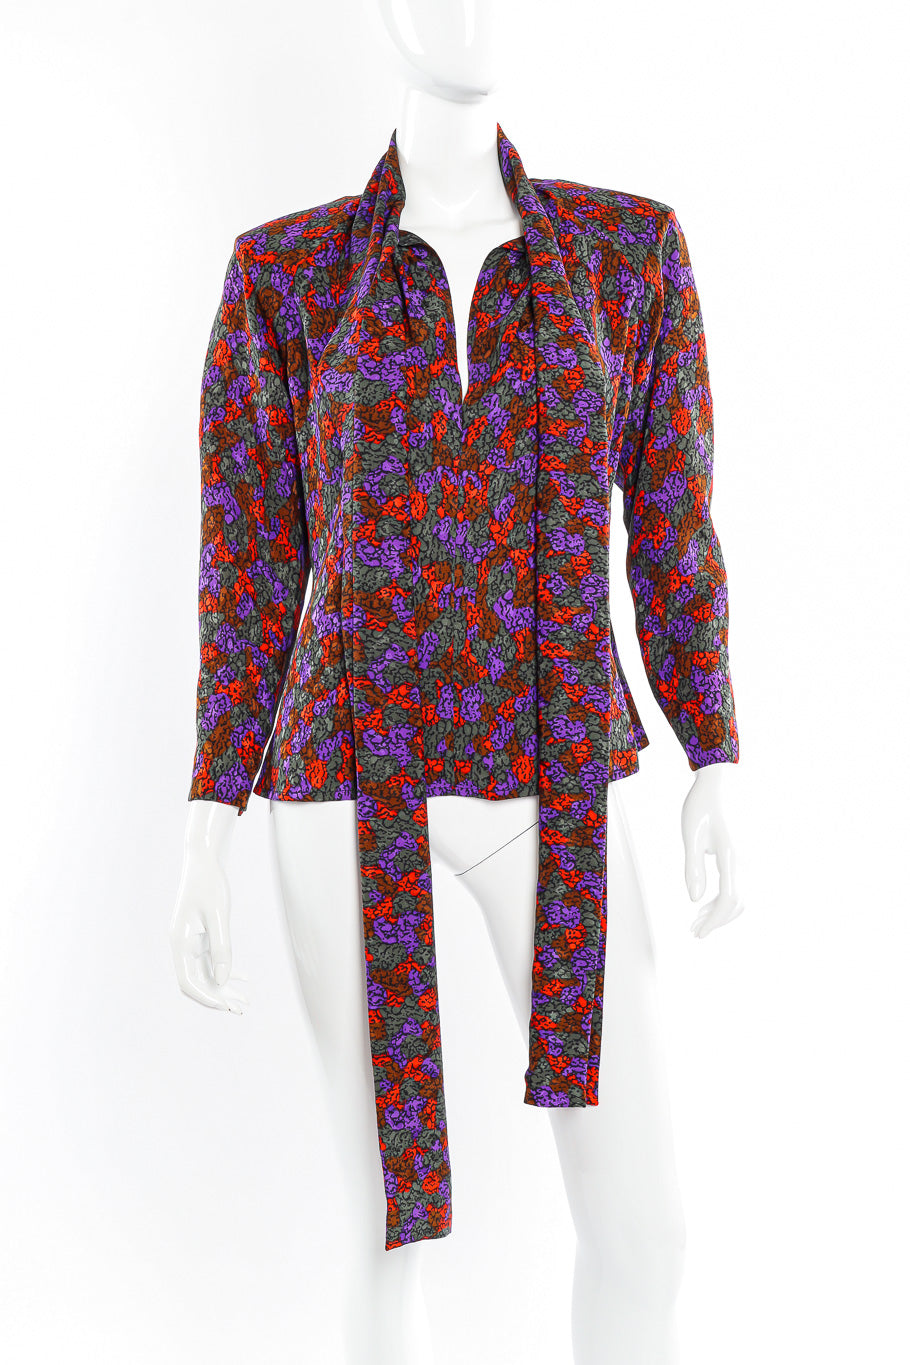 Silk blouse by Yves Saint Laurent on mannequin untied @recessla